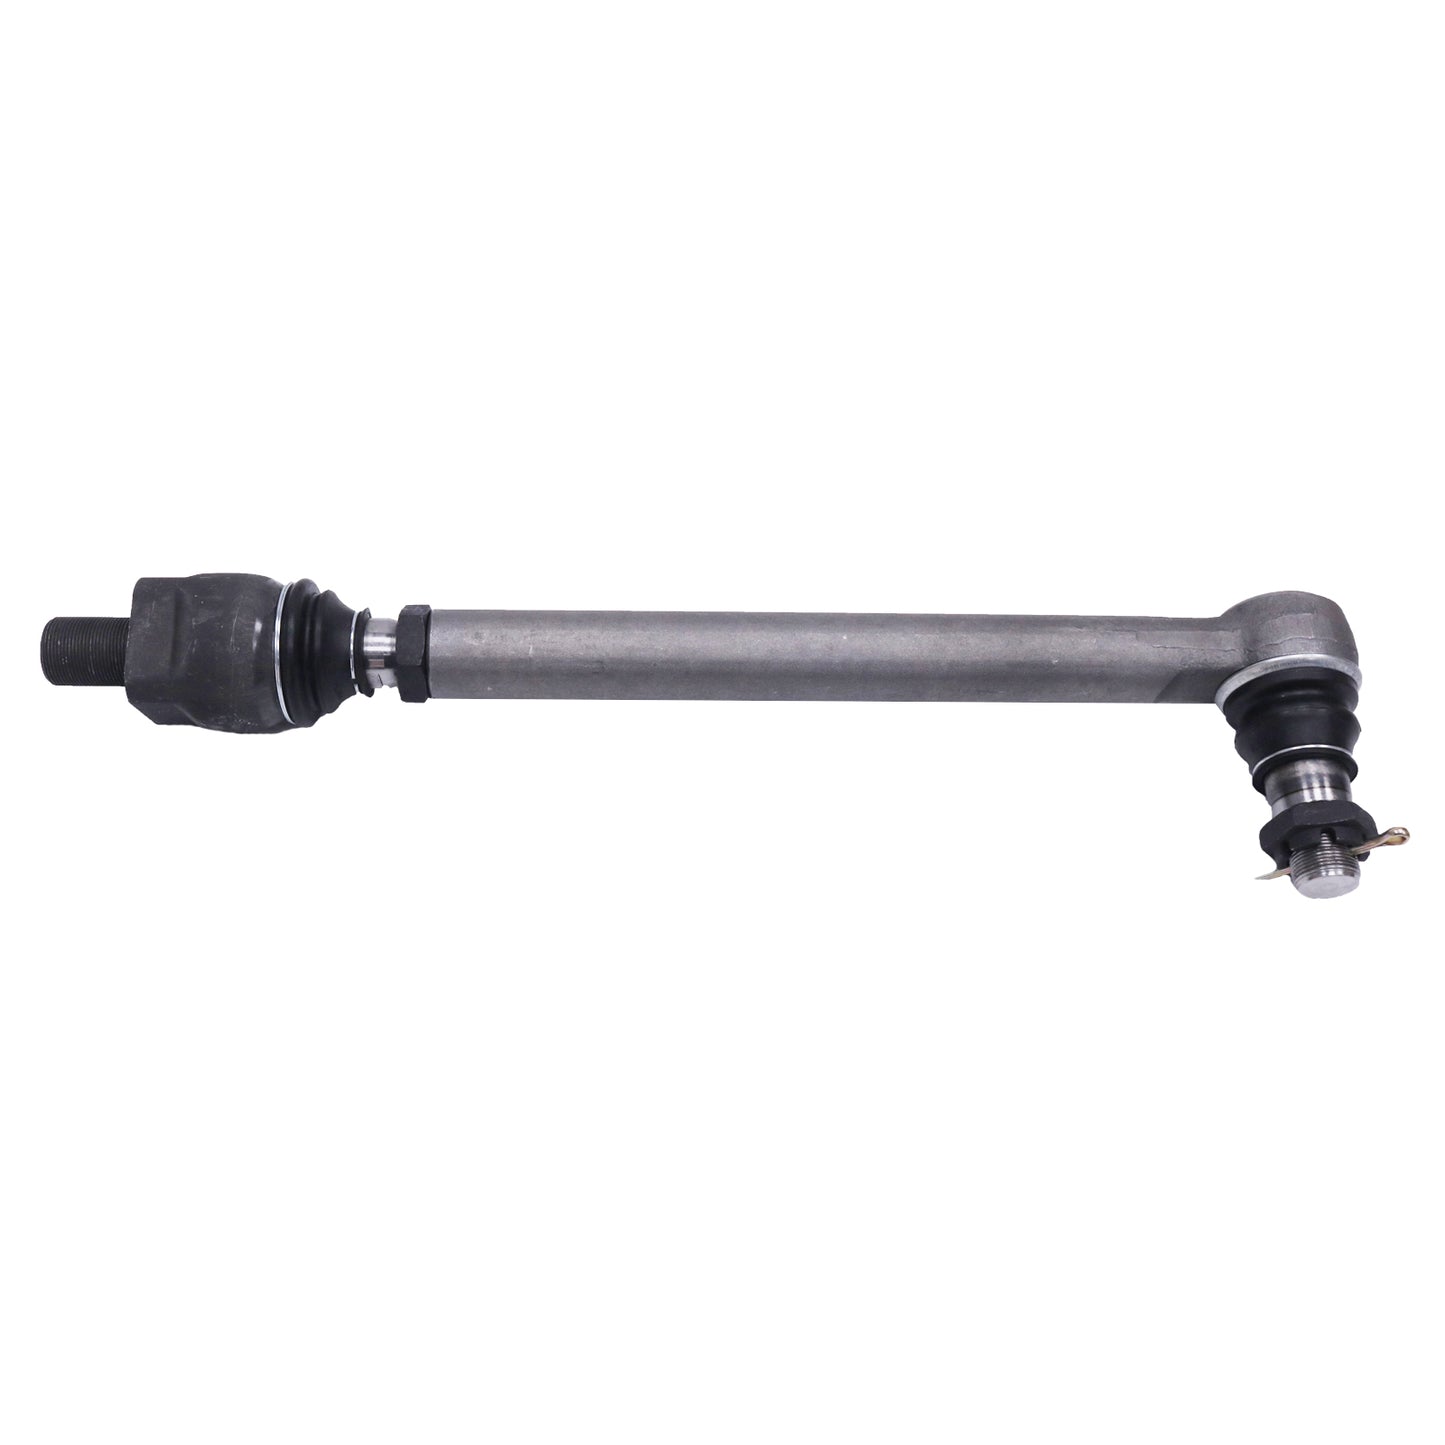 New 7029293 70026753 Articulated Tie Rod Compatible with JLG G10-55A G12-55A 1043 943 1055 1255 G15-44A G6-42A